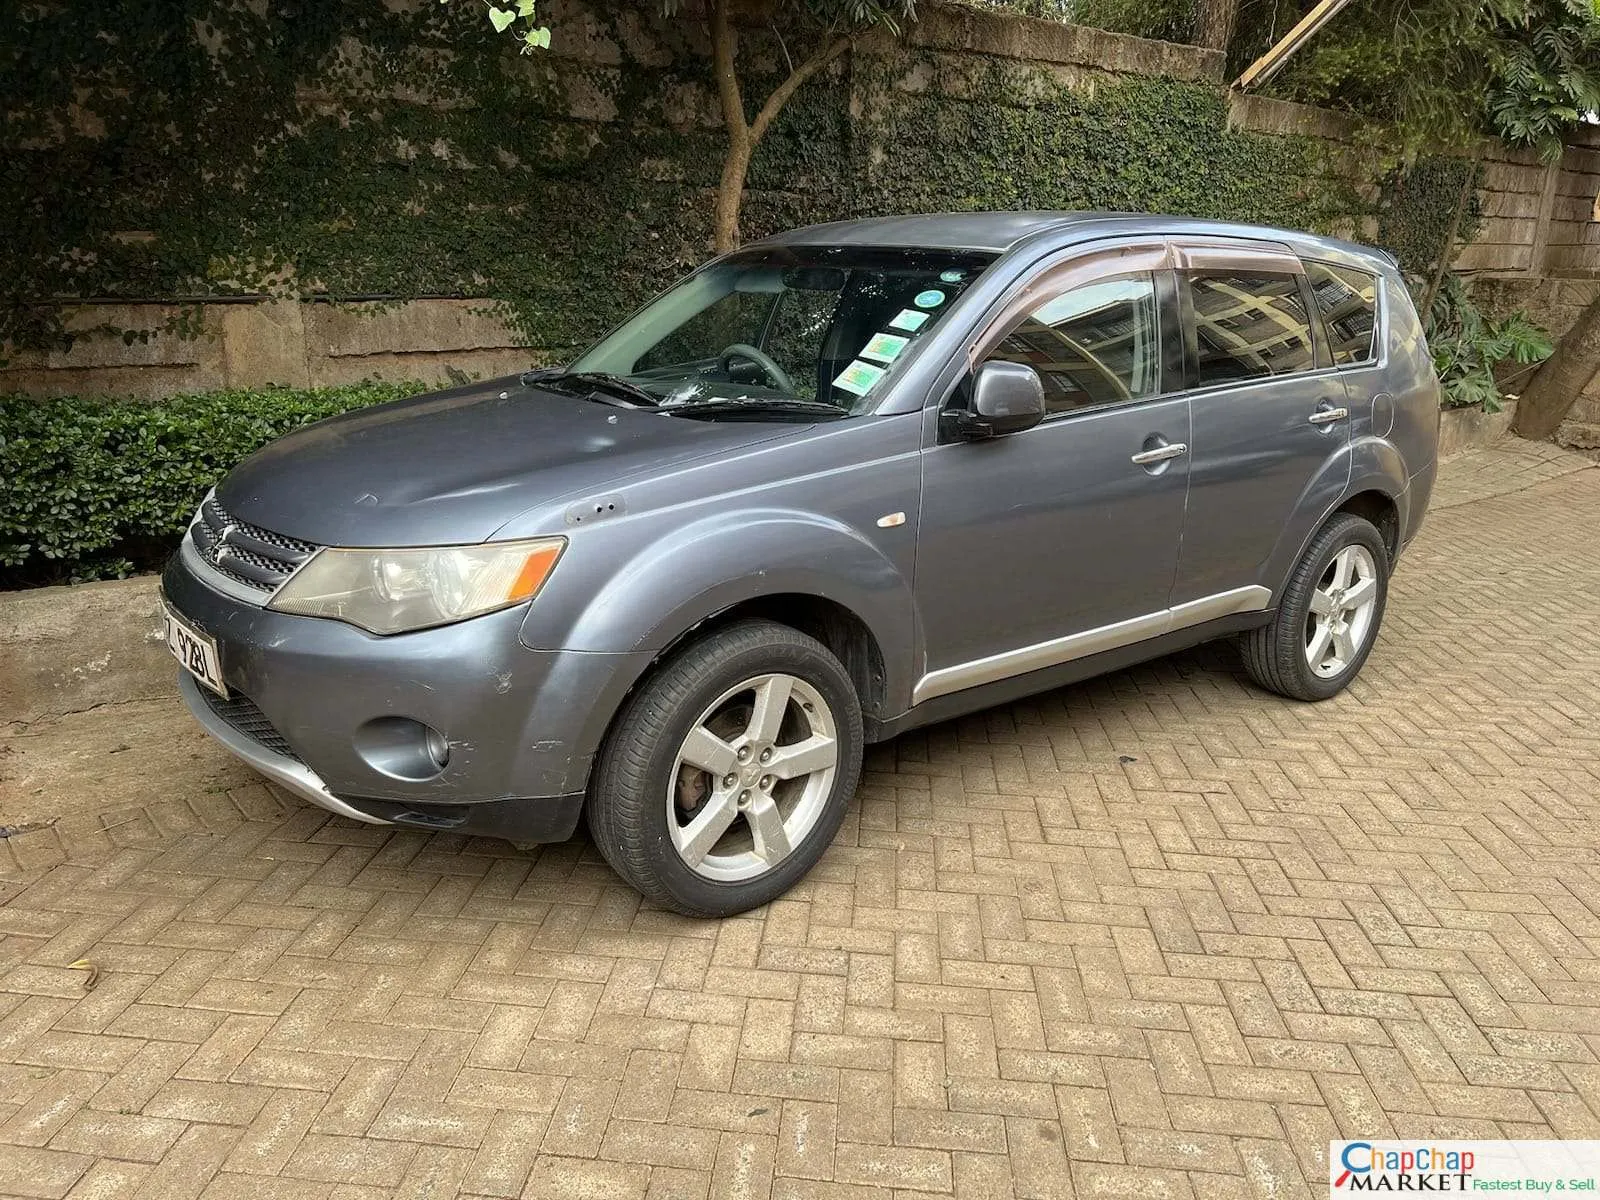 Mitsubishi OUTLANDER kenya CHEAPEST You Pay 30% Deposit Trade in Ok outlander for sale in kenya hire purchase installments EXCLUSIVE